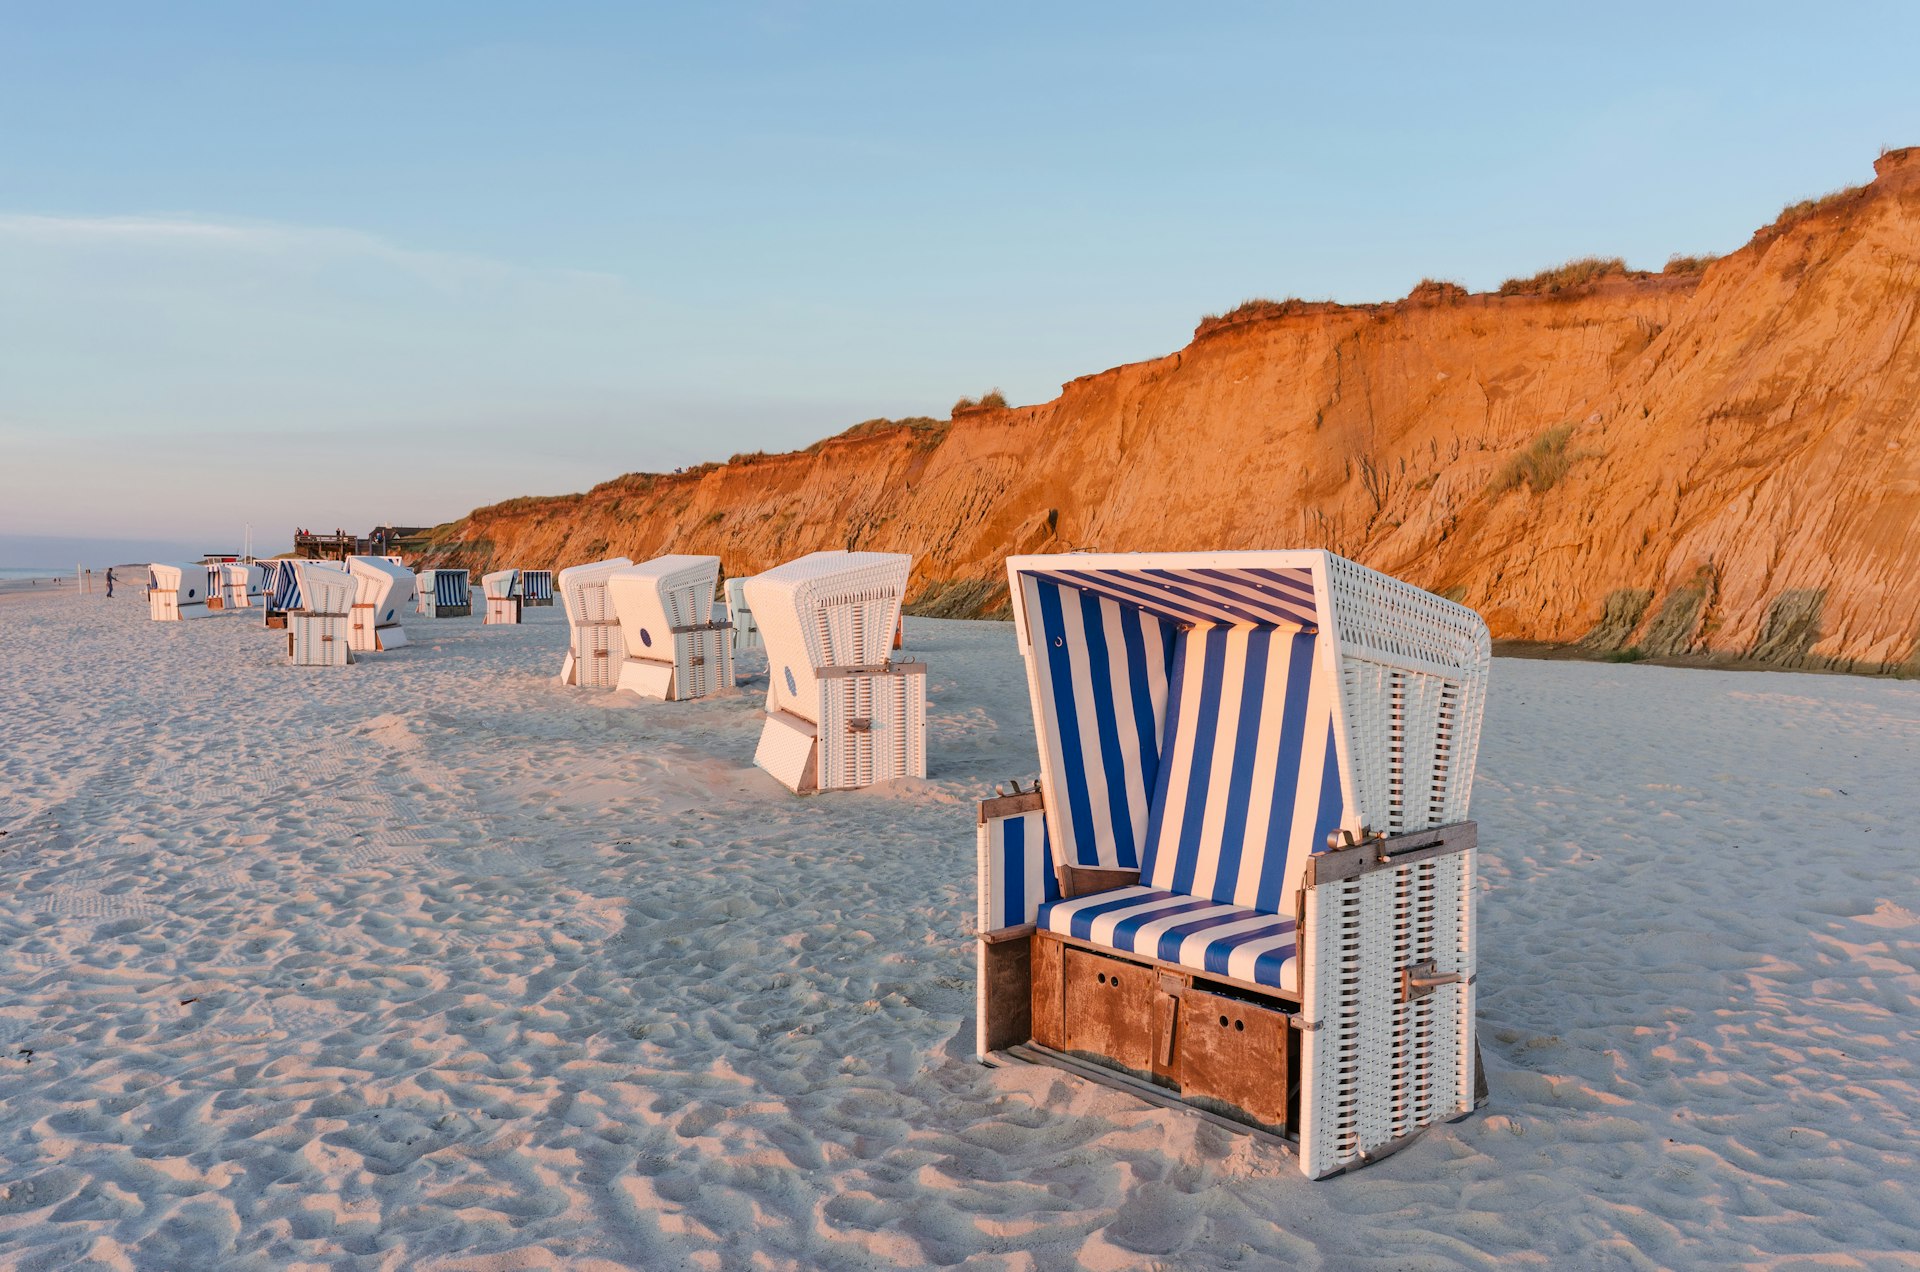 A basket chair, with blue-and-white striped cushions, on a sandy beach